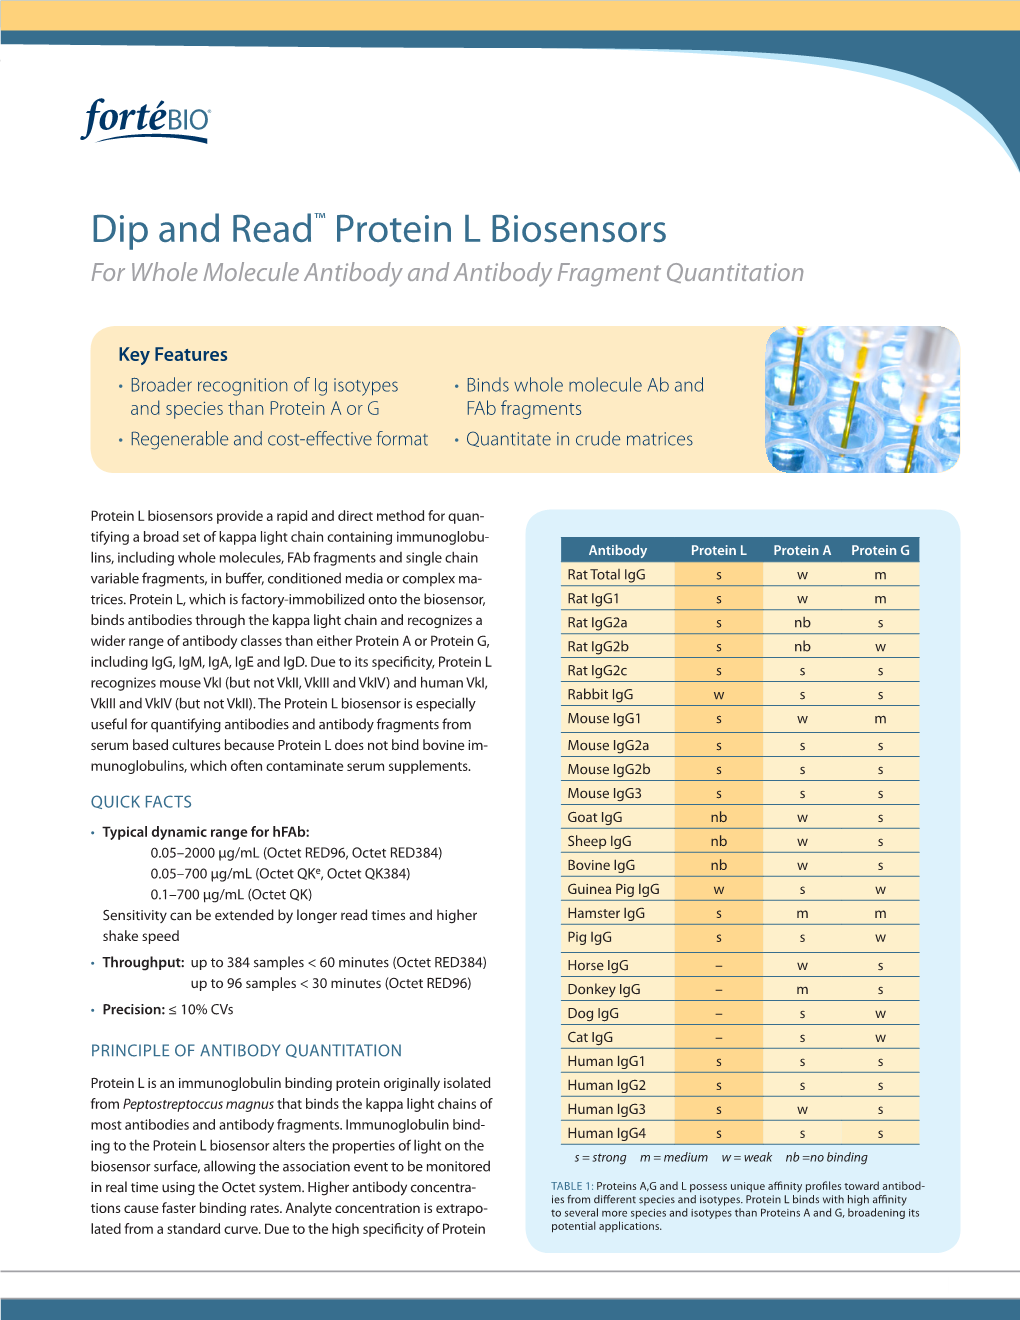 Dip and Read™ Protein L Biosensors for Whole Molecule Antibody and Antibody Fragment Quantitation